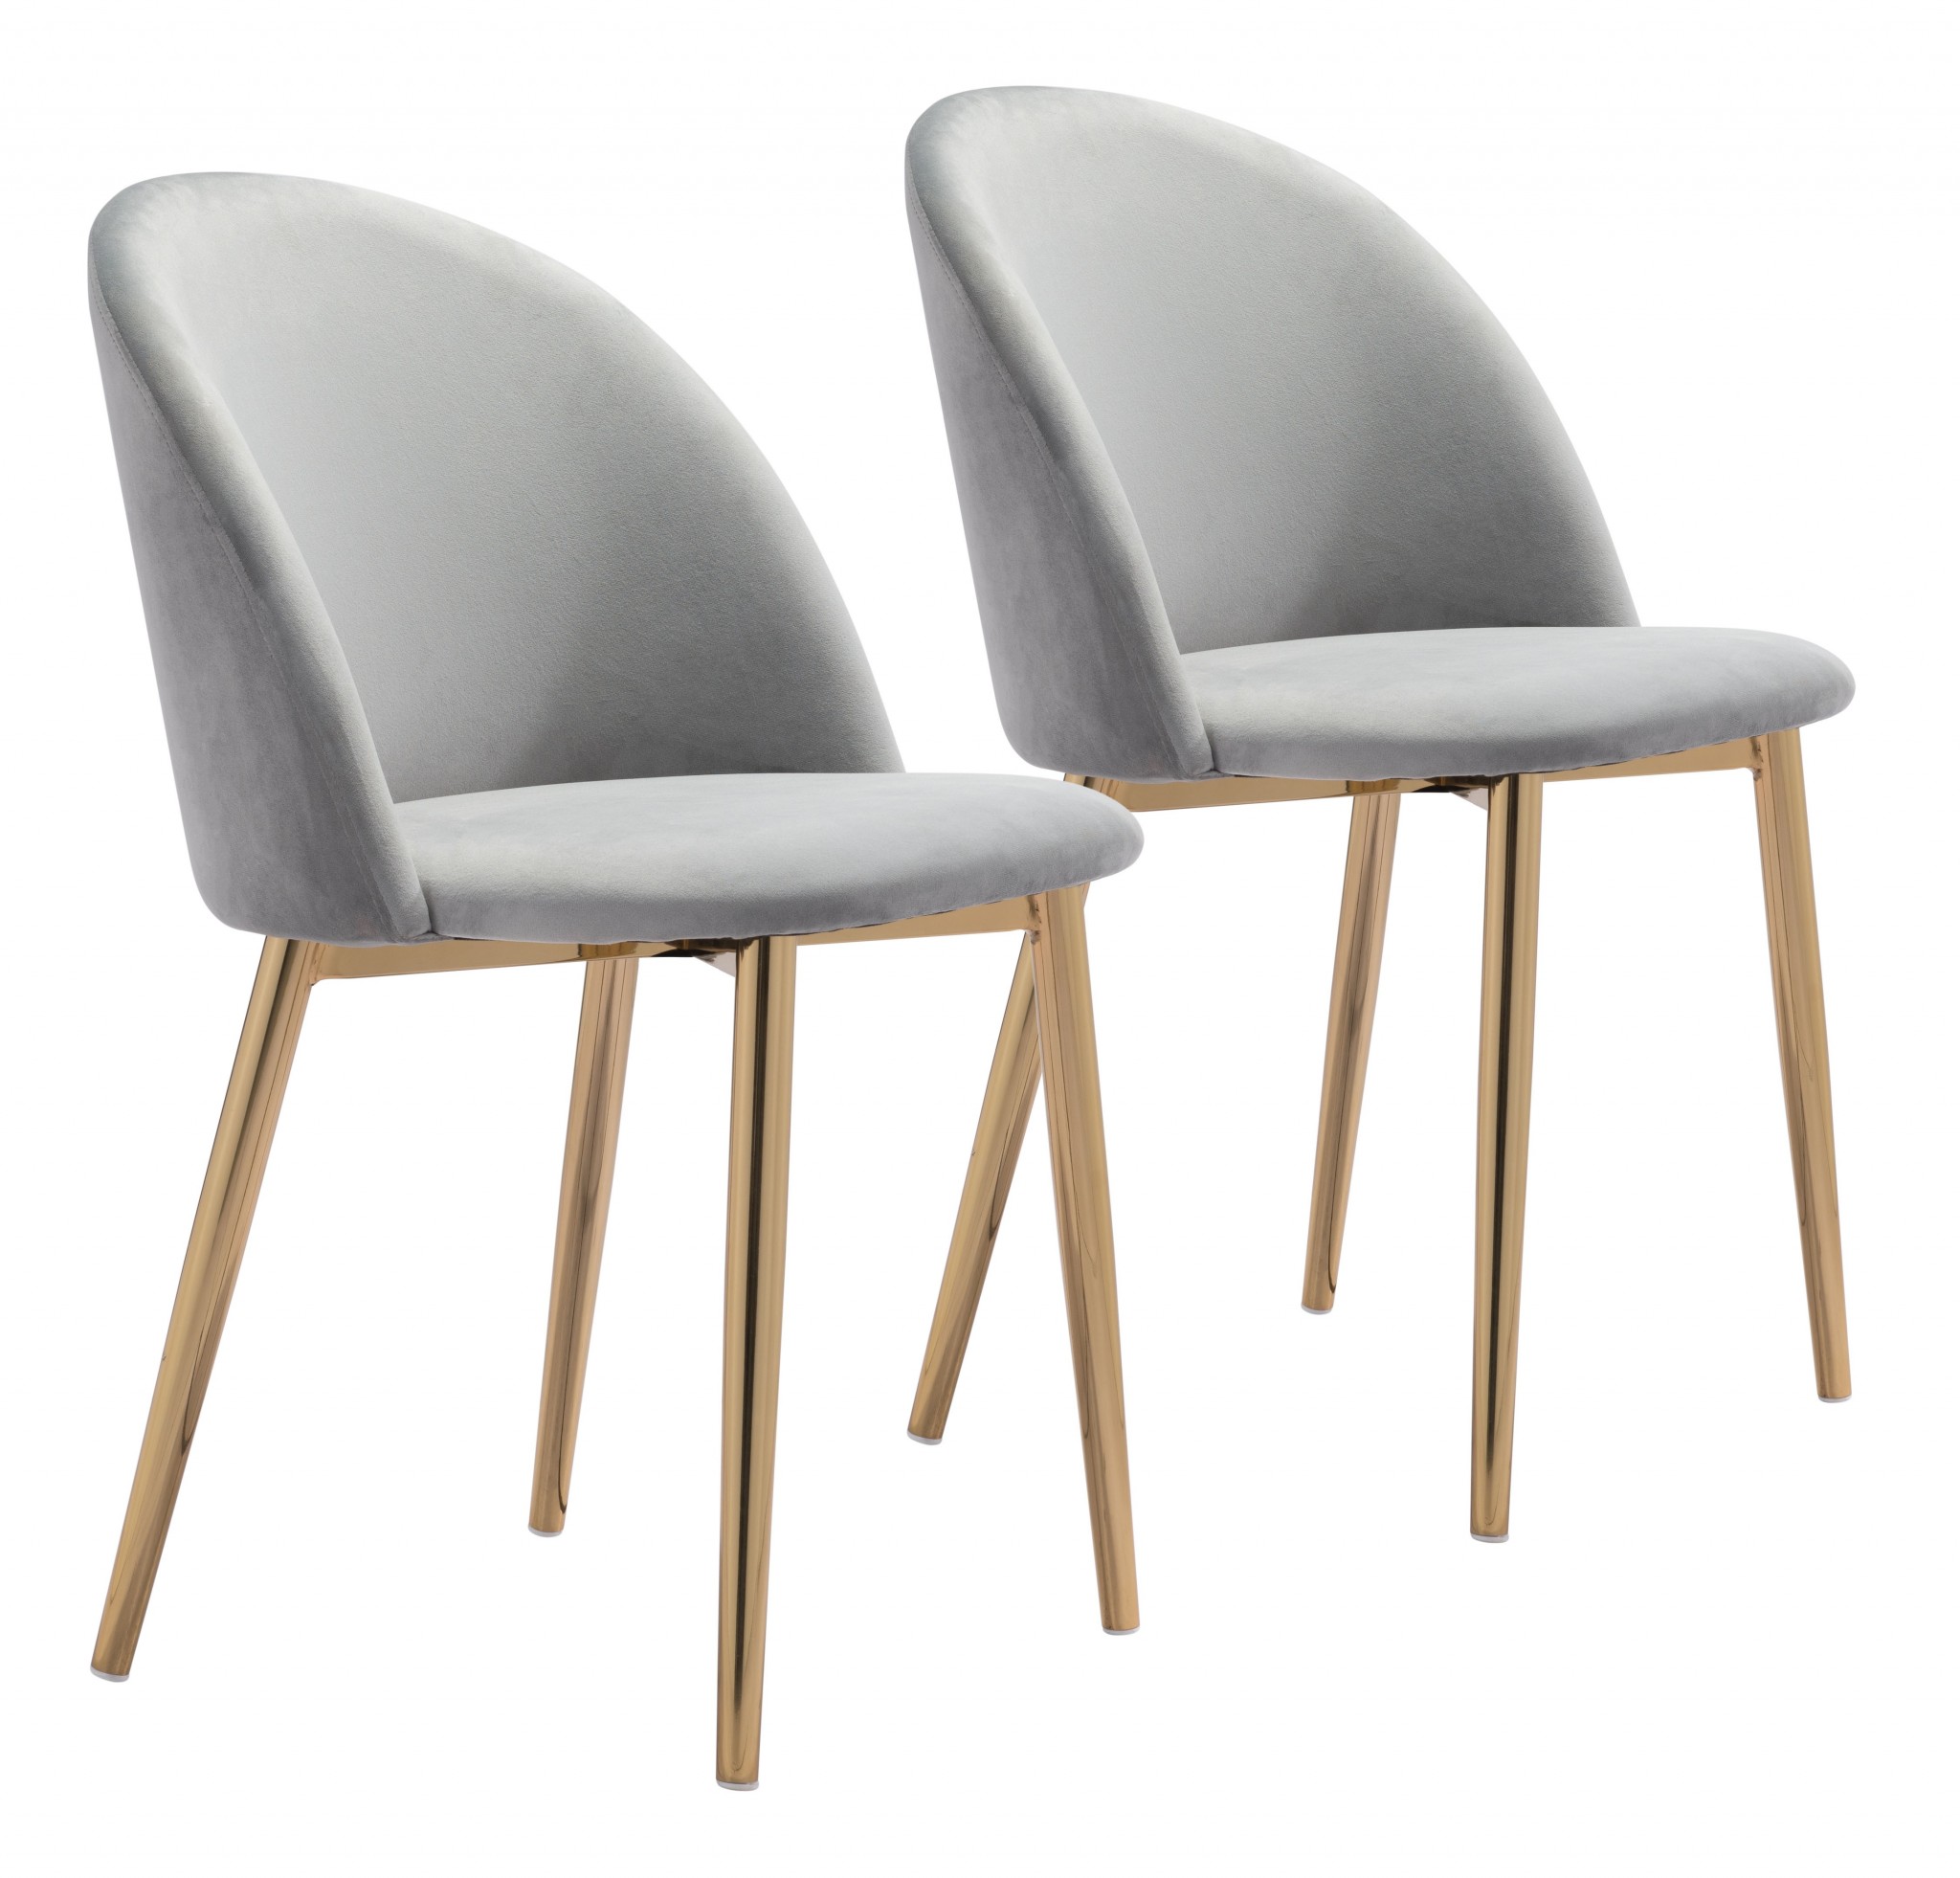 Set of Two Pale Gray and Gold Modern Pringle Dining Chairs